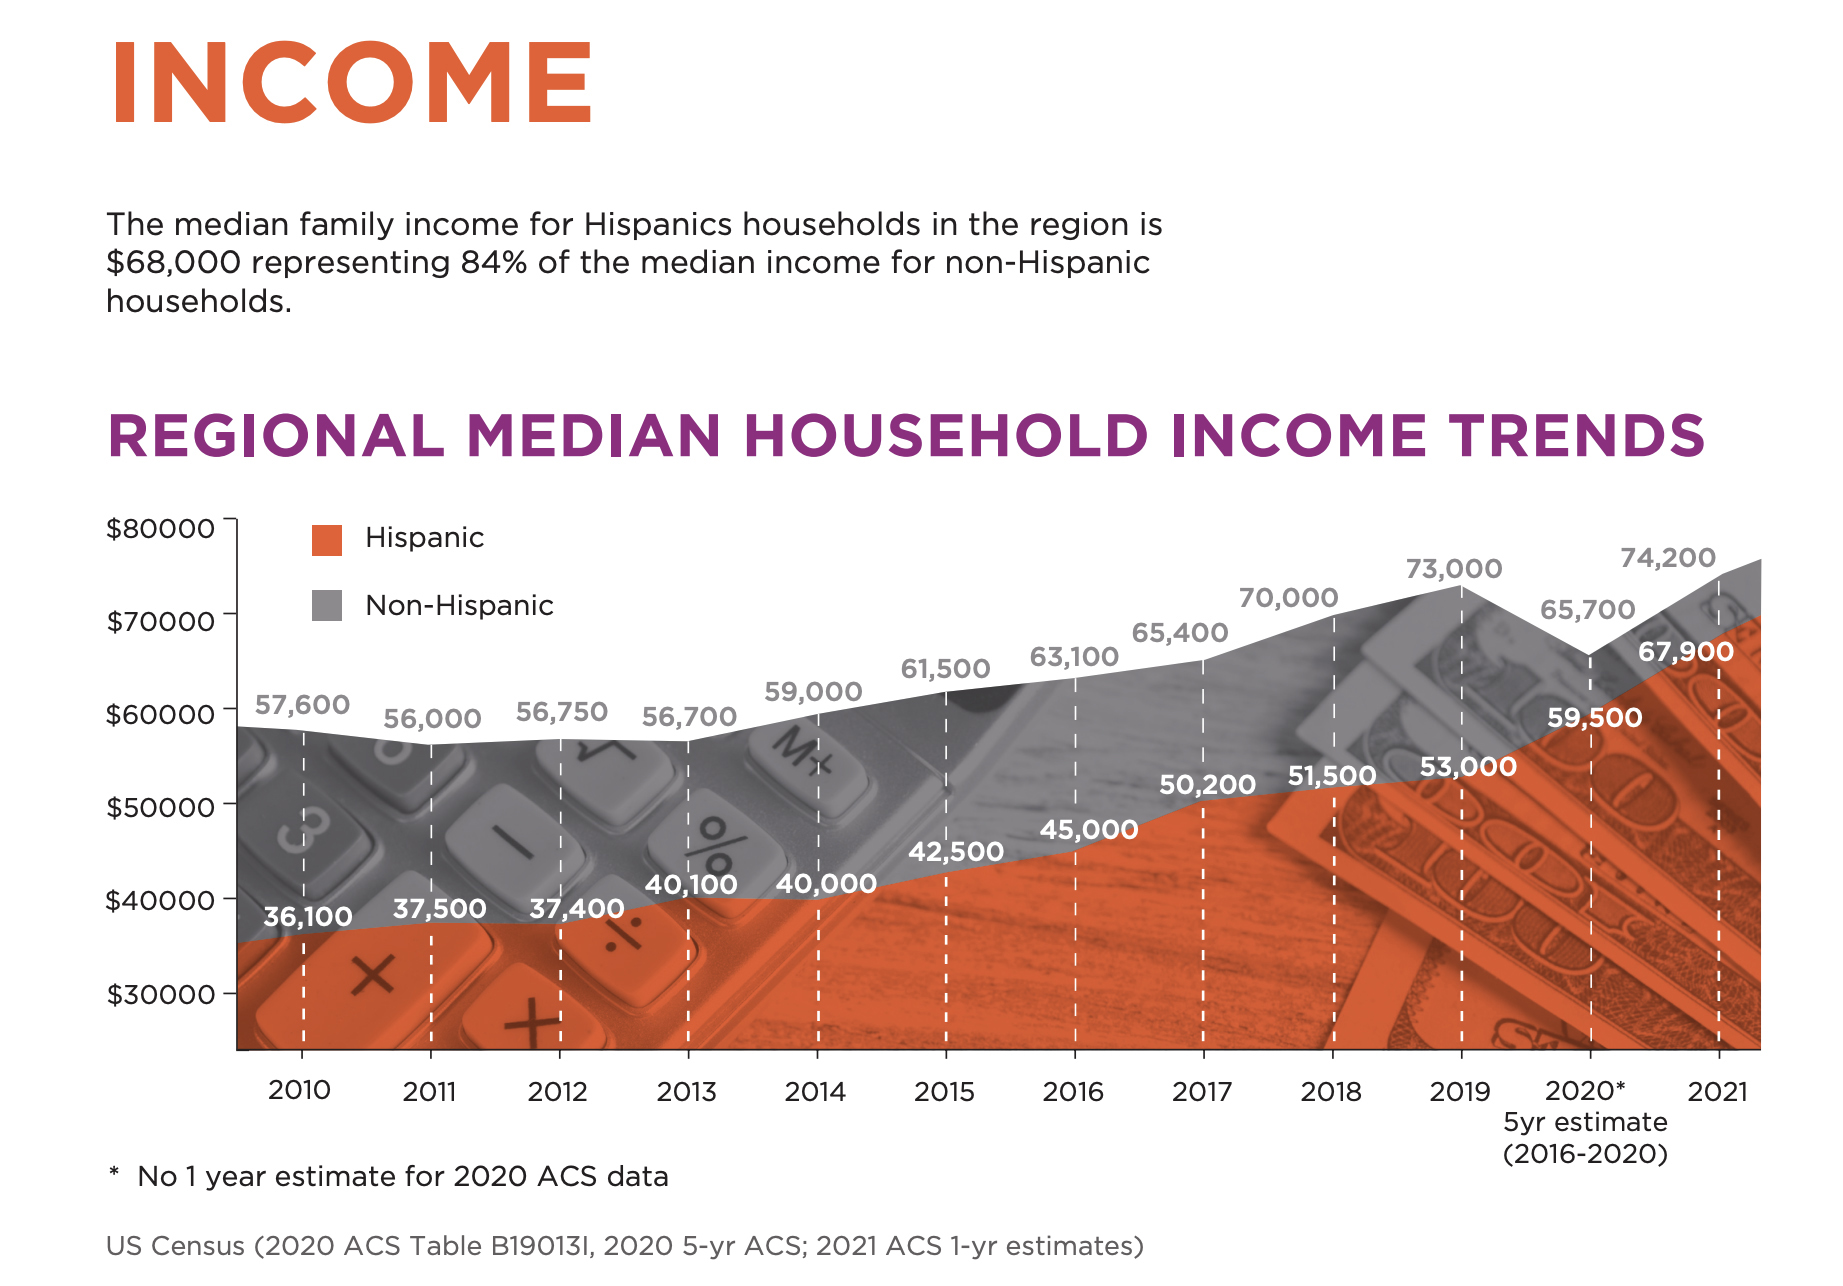 A chart showing income trends for Hispanic and non-Hispanic residents in the Sacramento region.